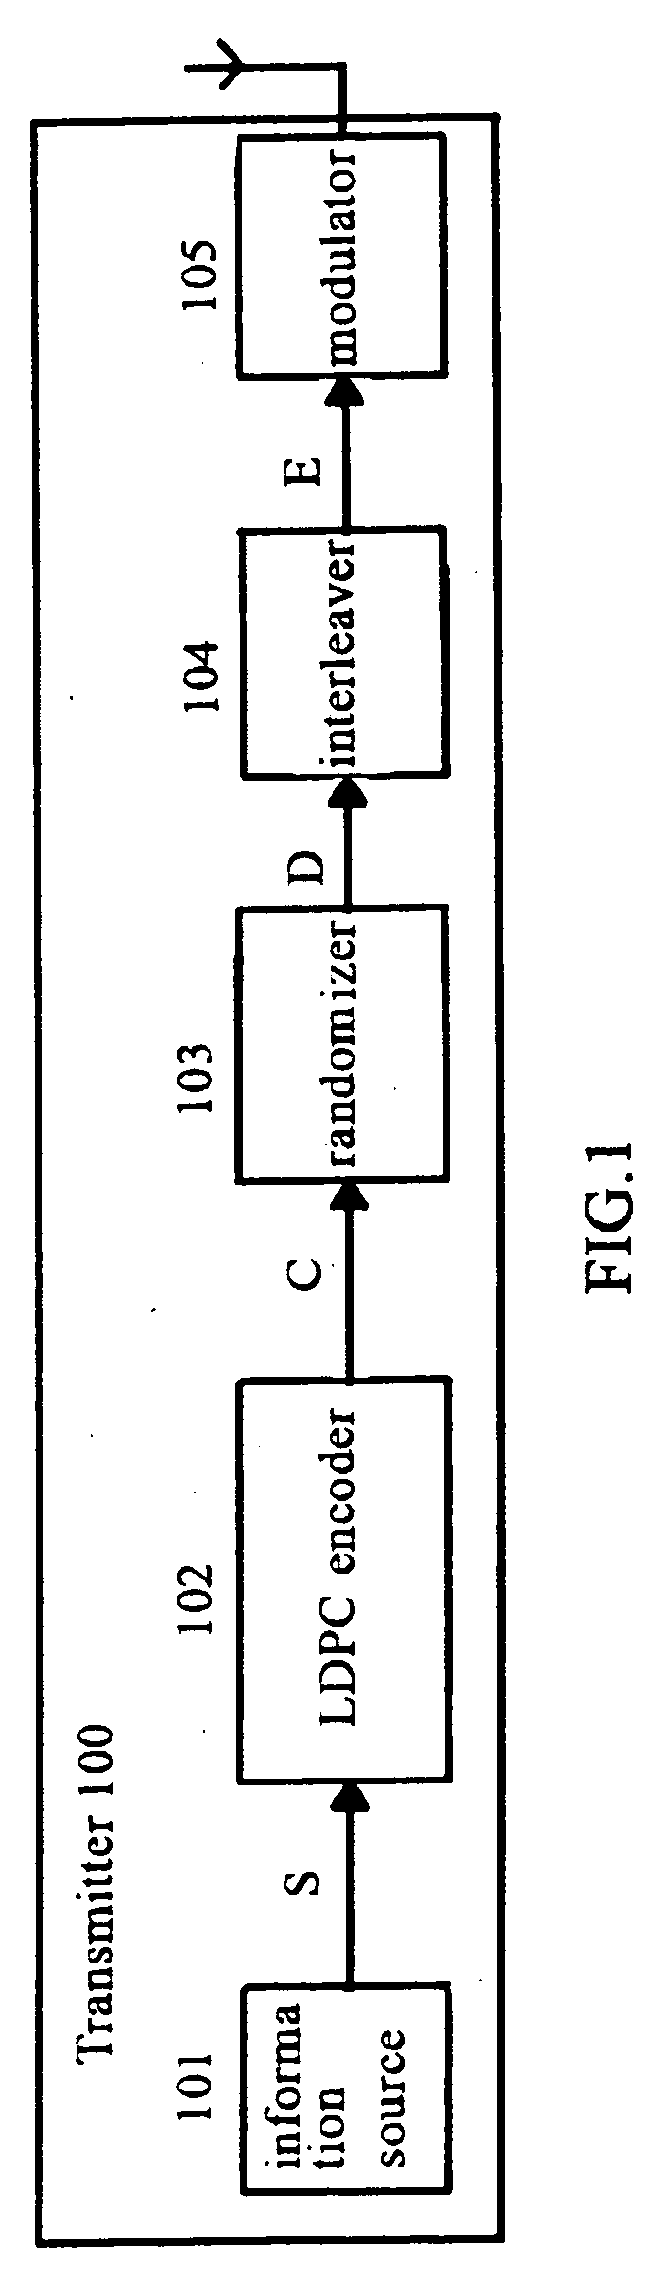 Method of Constructing Low Density Parity Check Code, Method of Decoding the Same and Transmission System For the Same